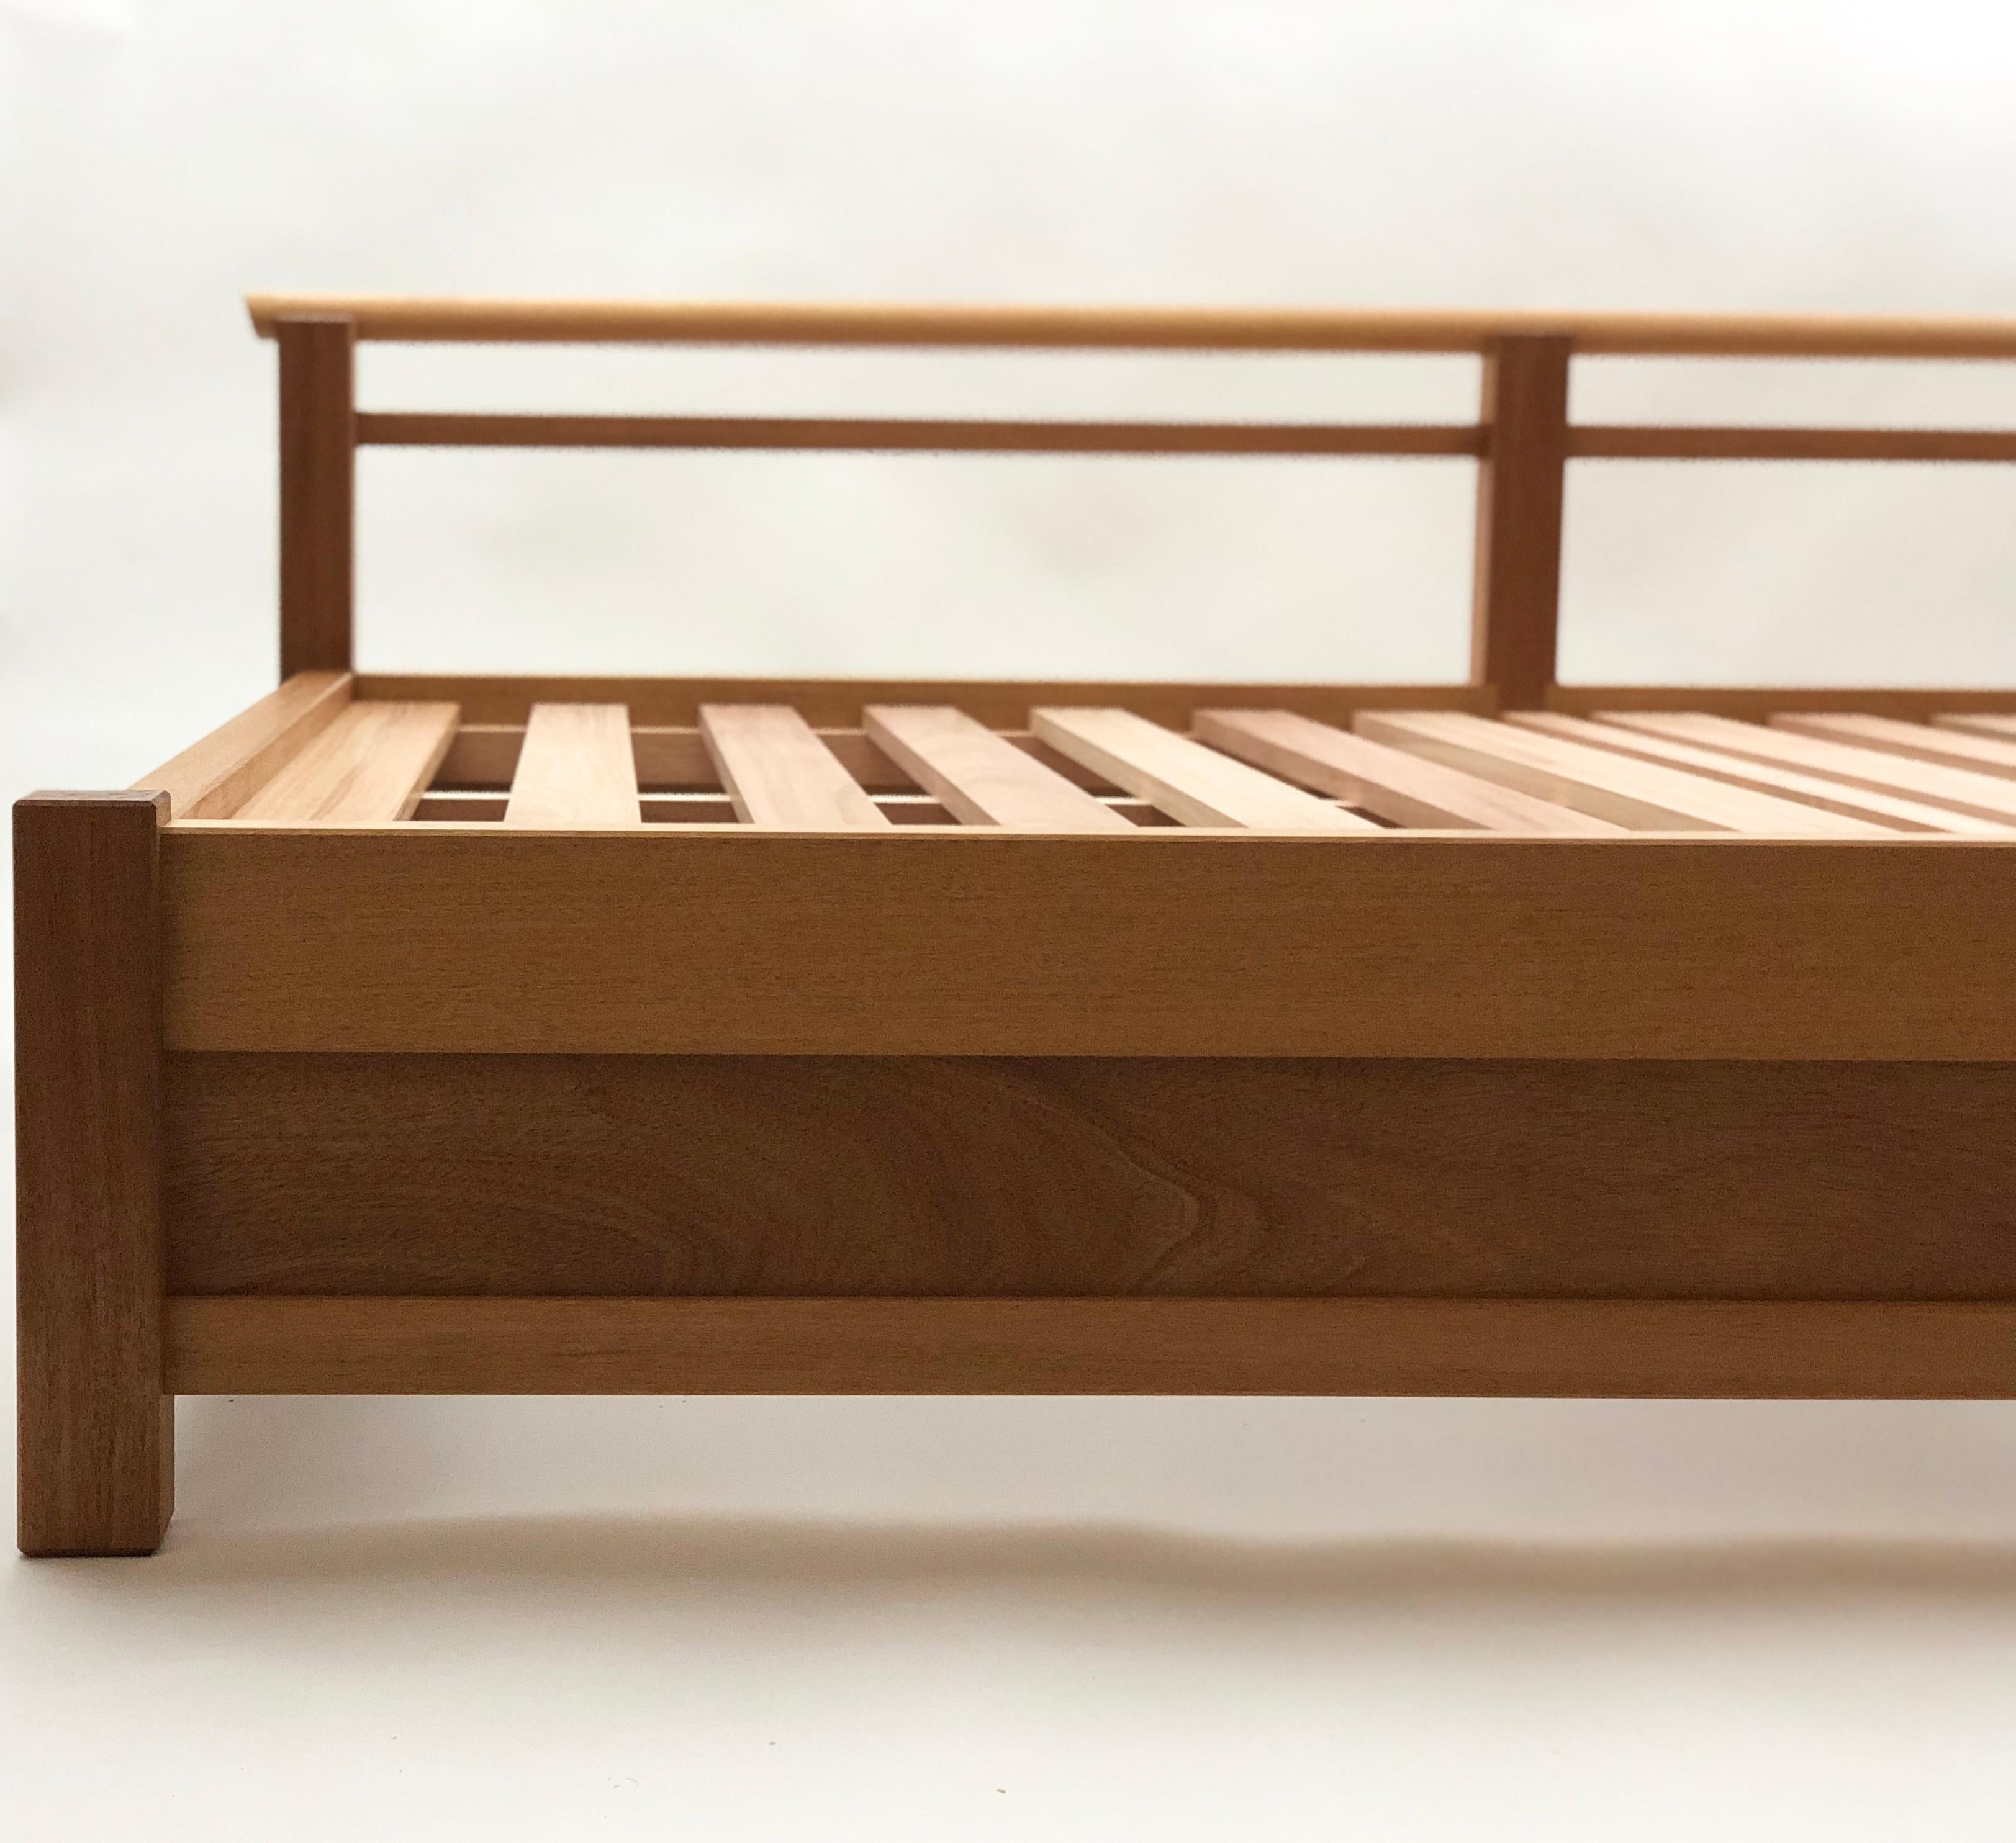 This daybed was inspired by the Uji bridge at Naiku temple in Japan. It is featured in Honduran mahogany and made for indoor/outdoor use in Honduran mahogany. This daybed is also available in oiled walnut or oiled ash. 

The construction of this